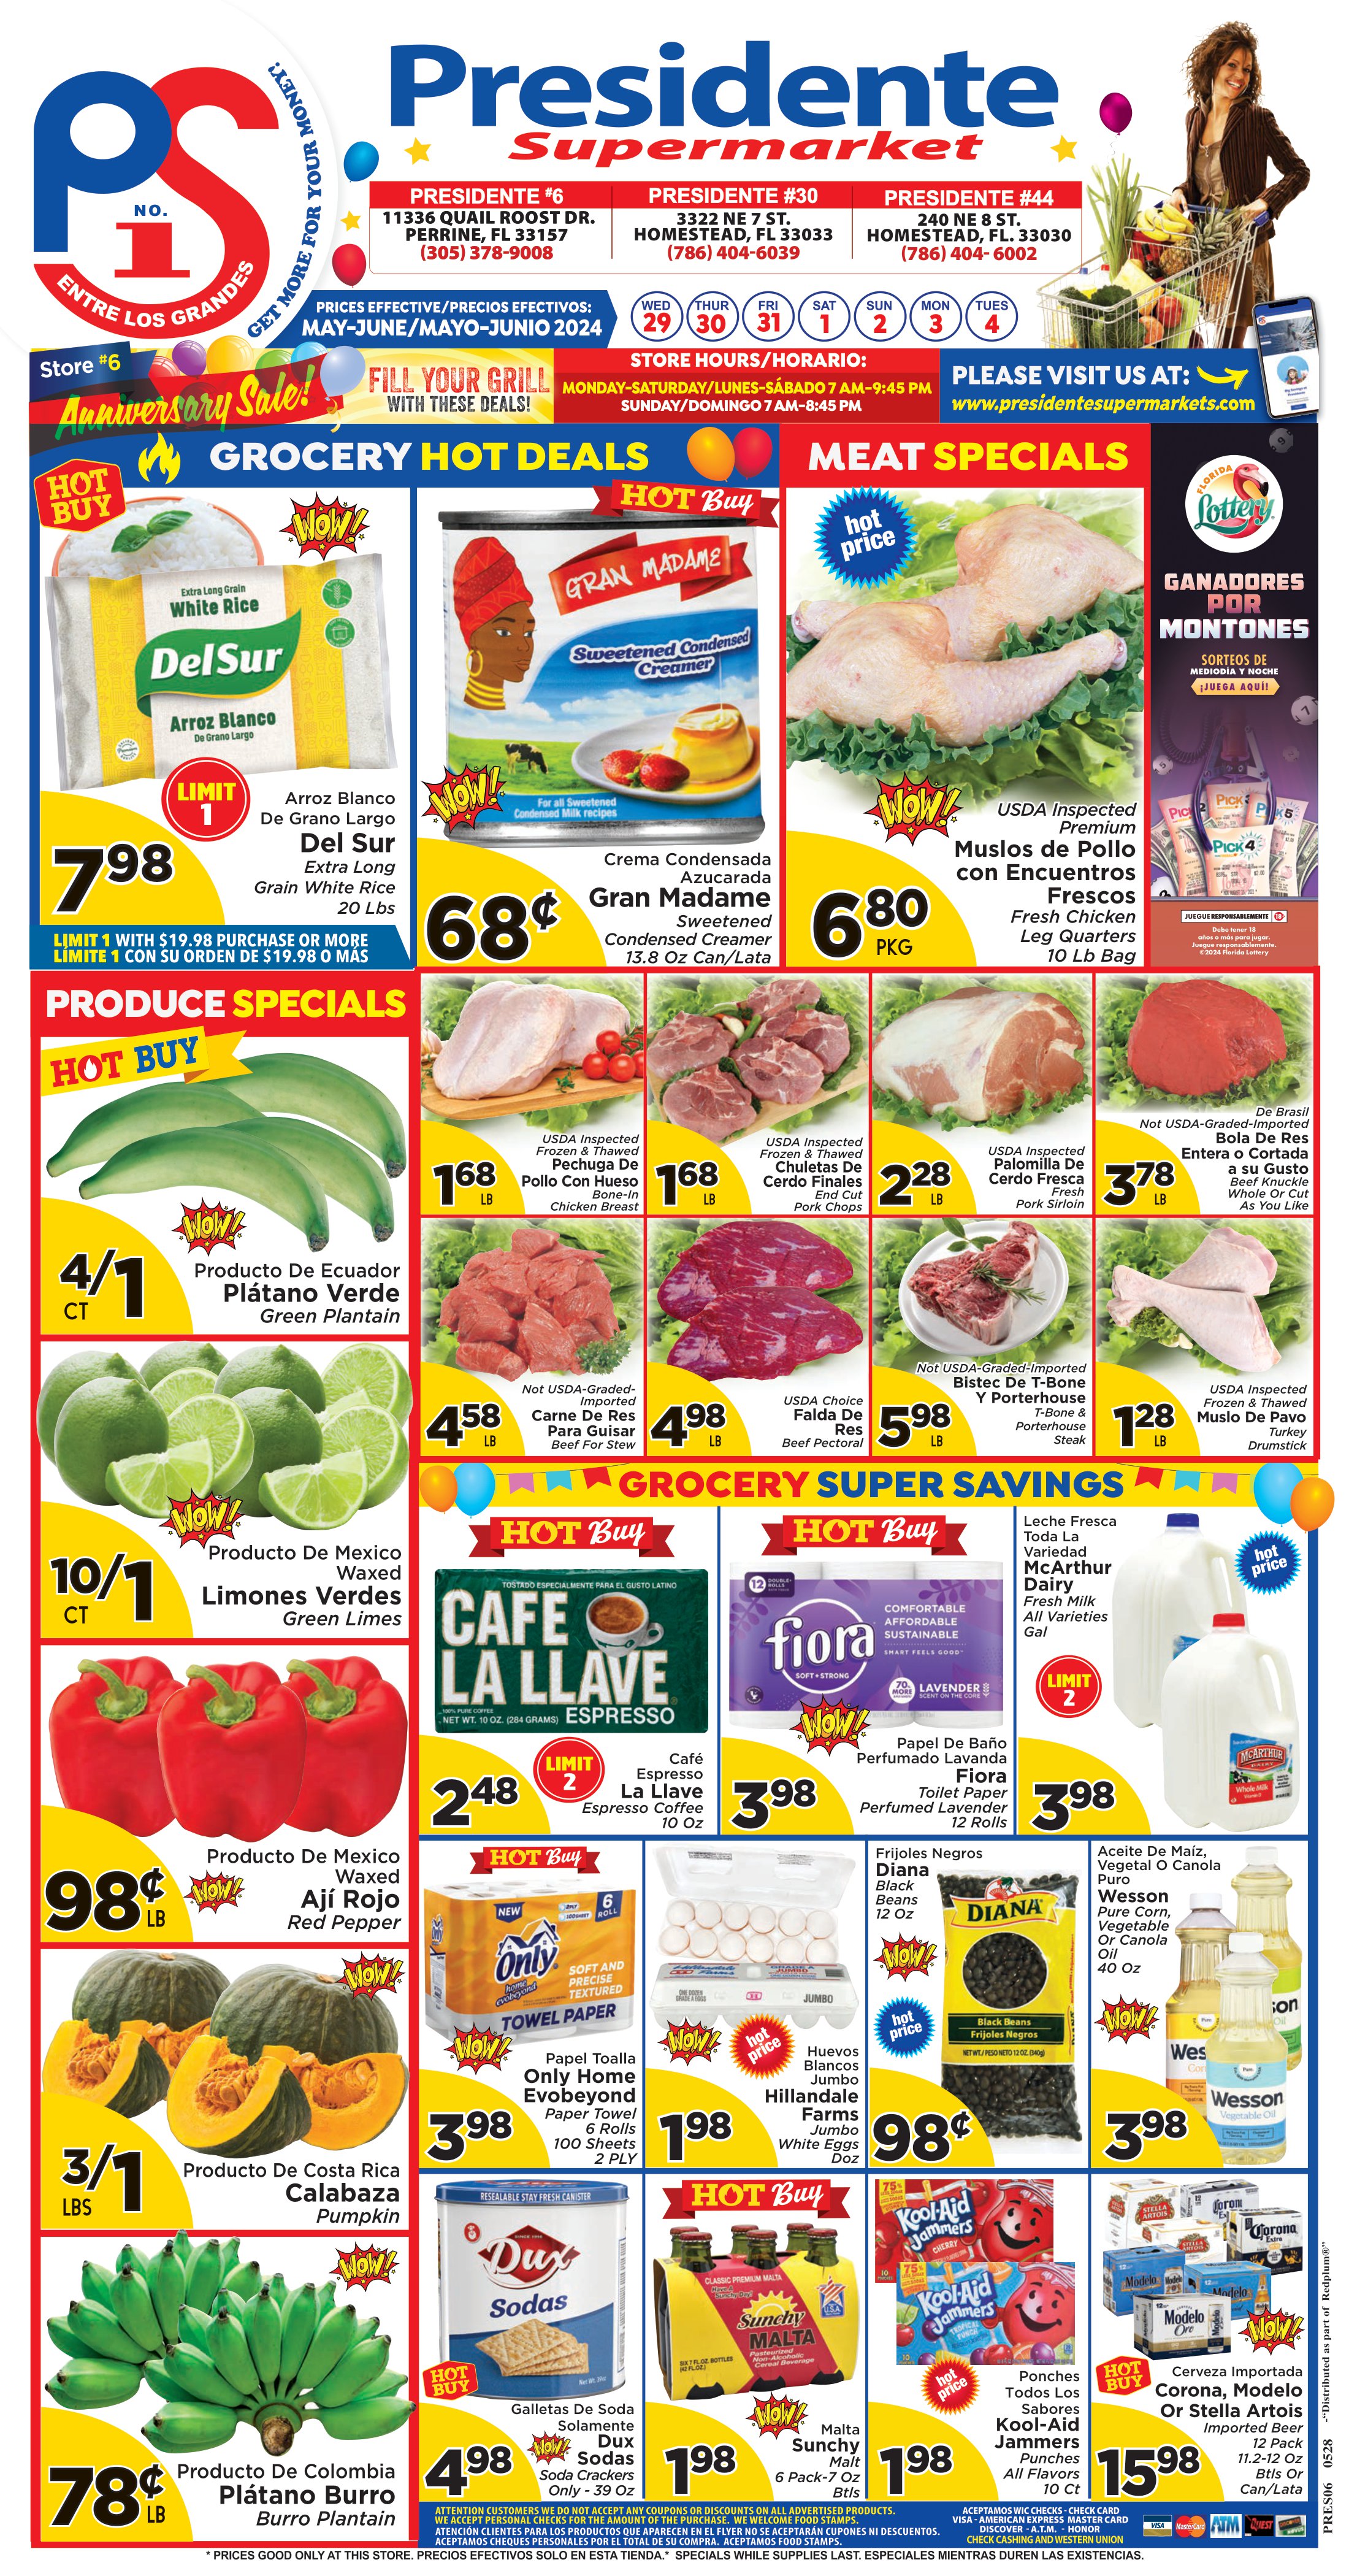 Presidente Supermarket - Weekly Promo for Stores 6 Page 1